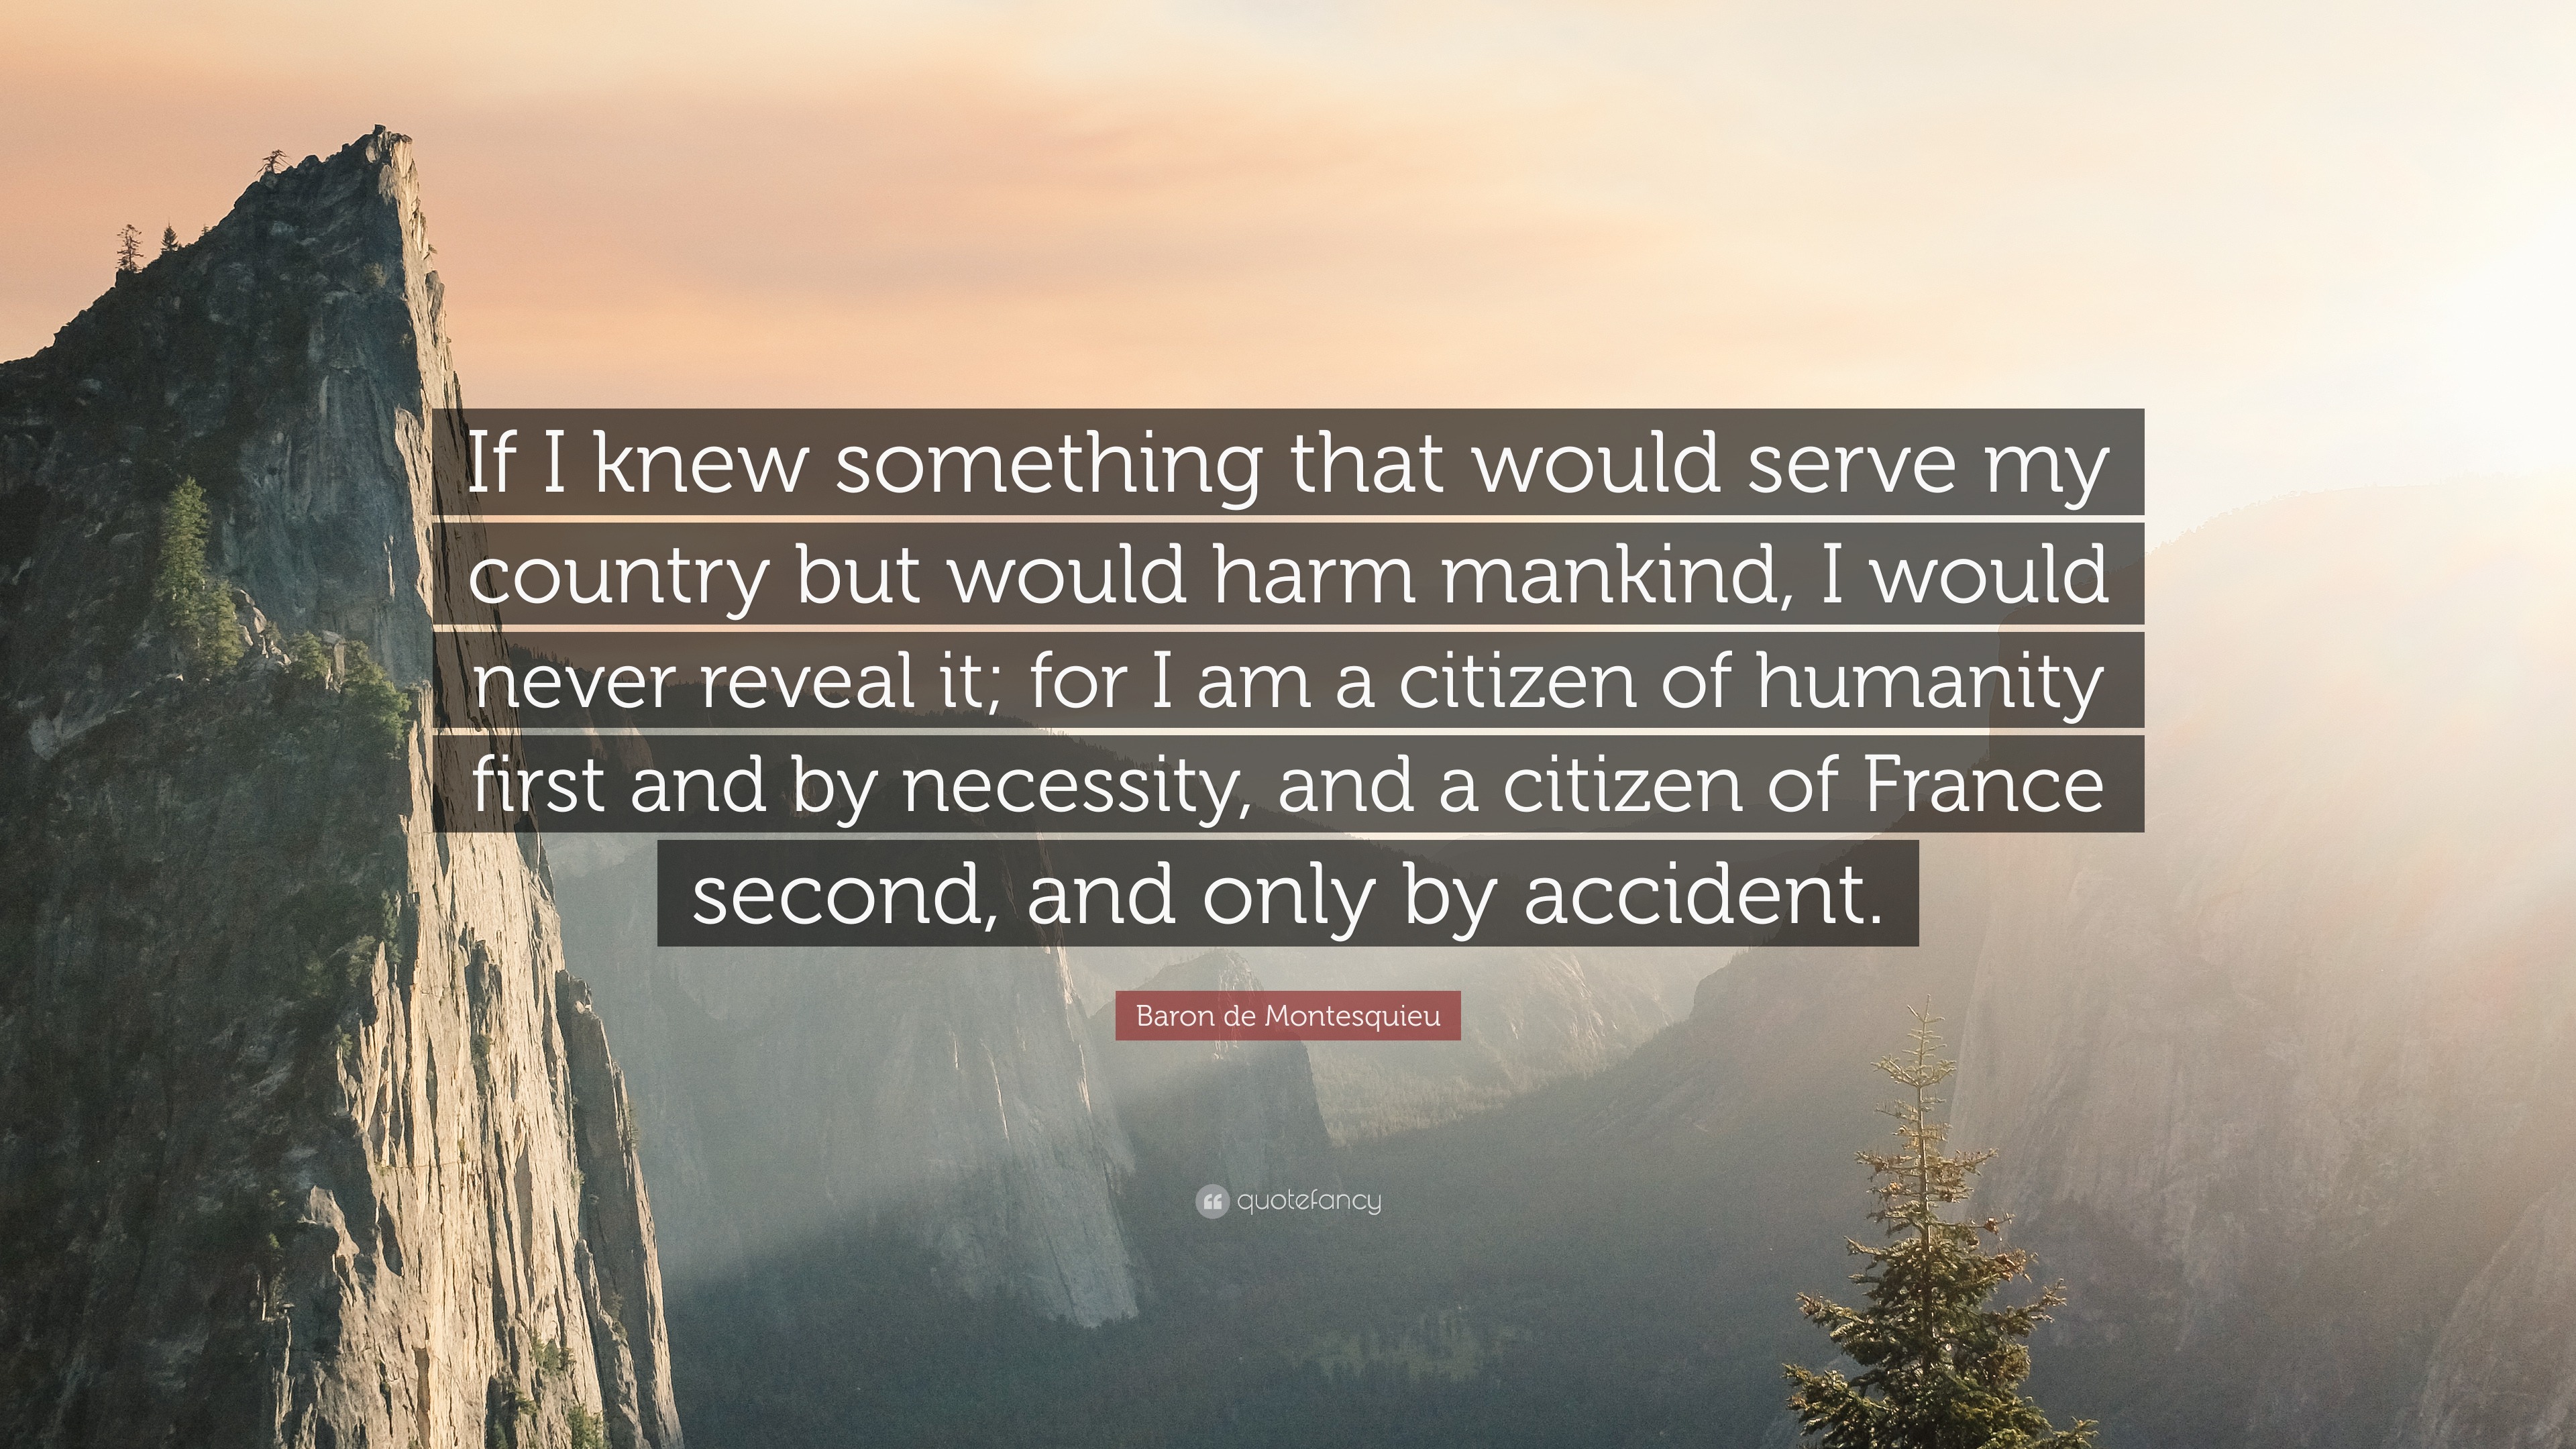 Baron de Montesquieu Quote: “If I knew something that would serve my  country but would harm mankind, I would never reveal it; for I am a citizen  of h...”